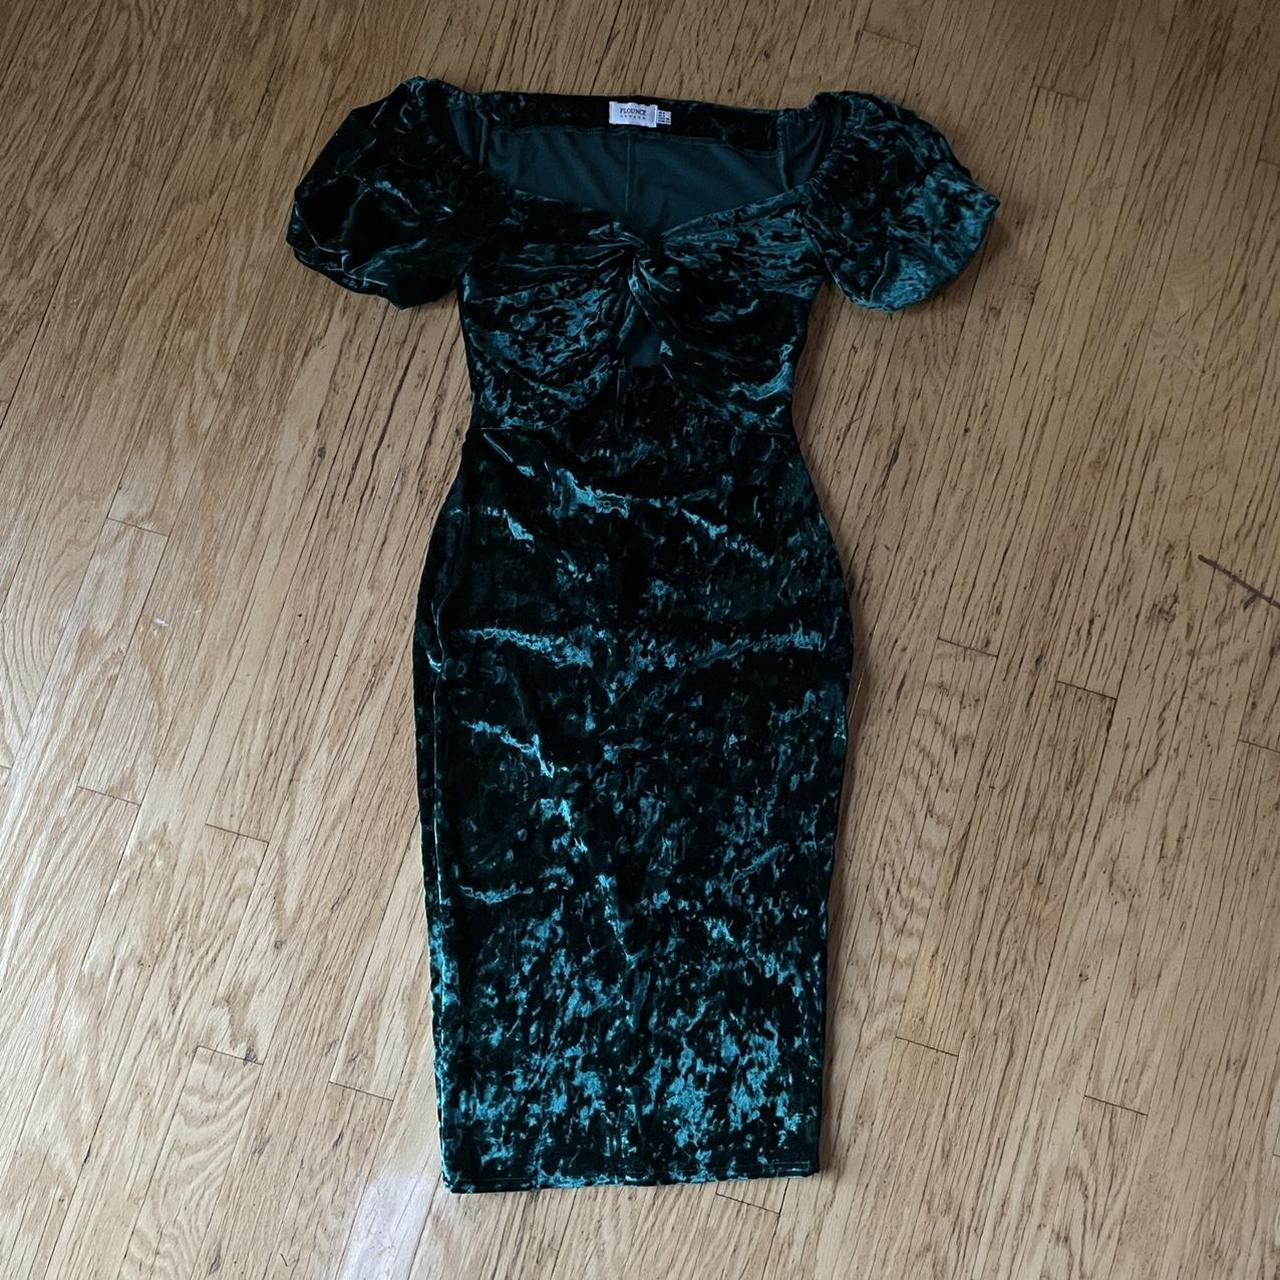 item listed by cherishedsecondhand